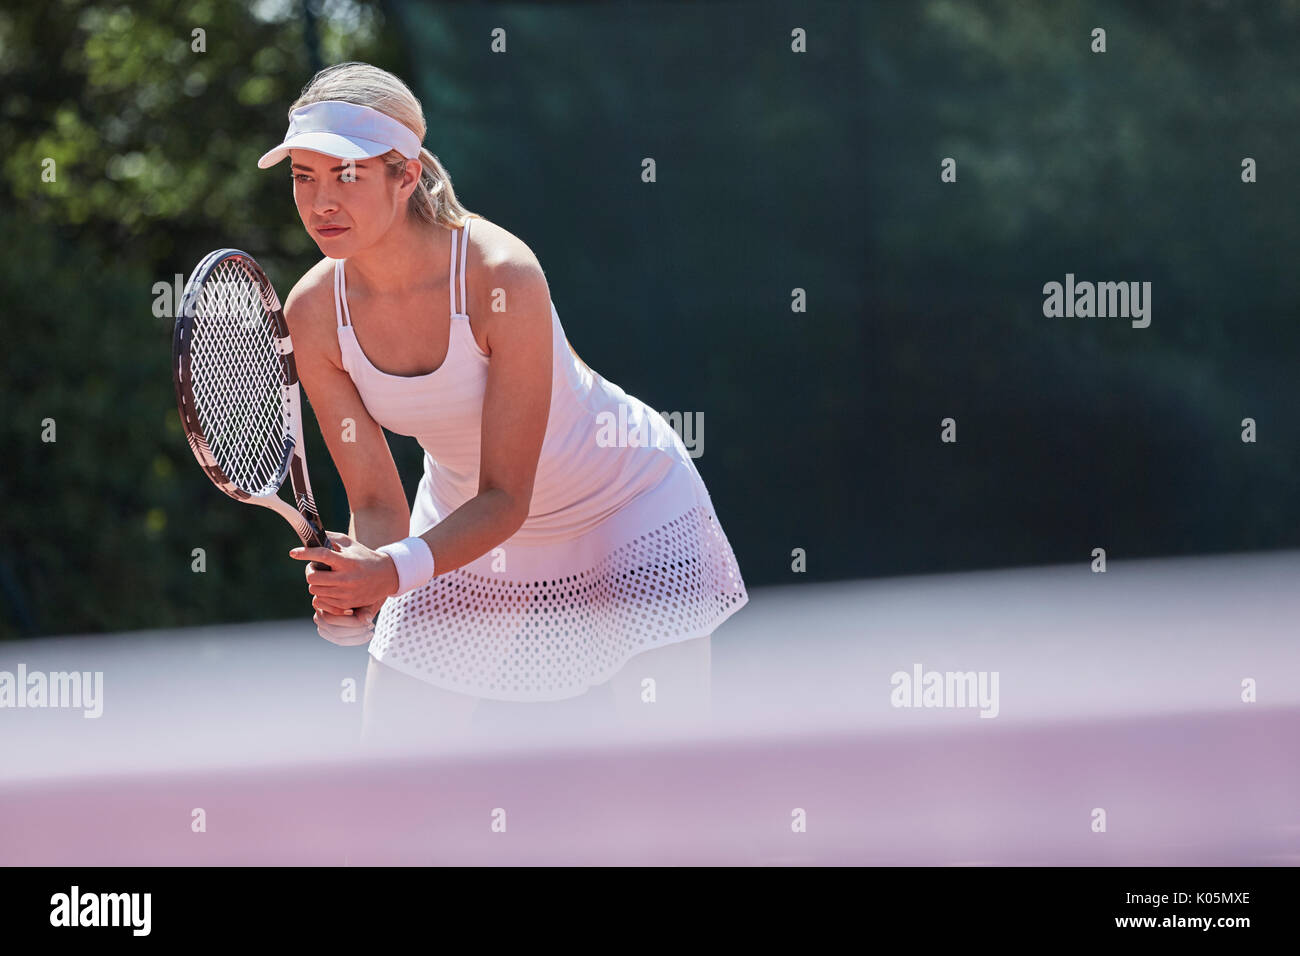 Focused young female tennis player ready, holding tennis racket on sunny tennis court Stock Photo